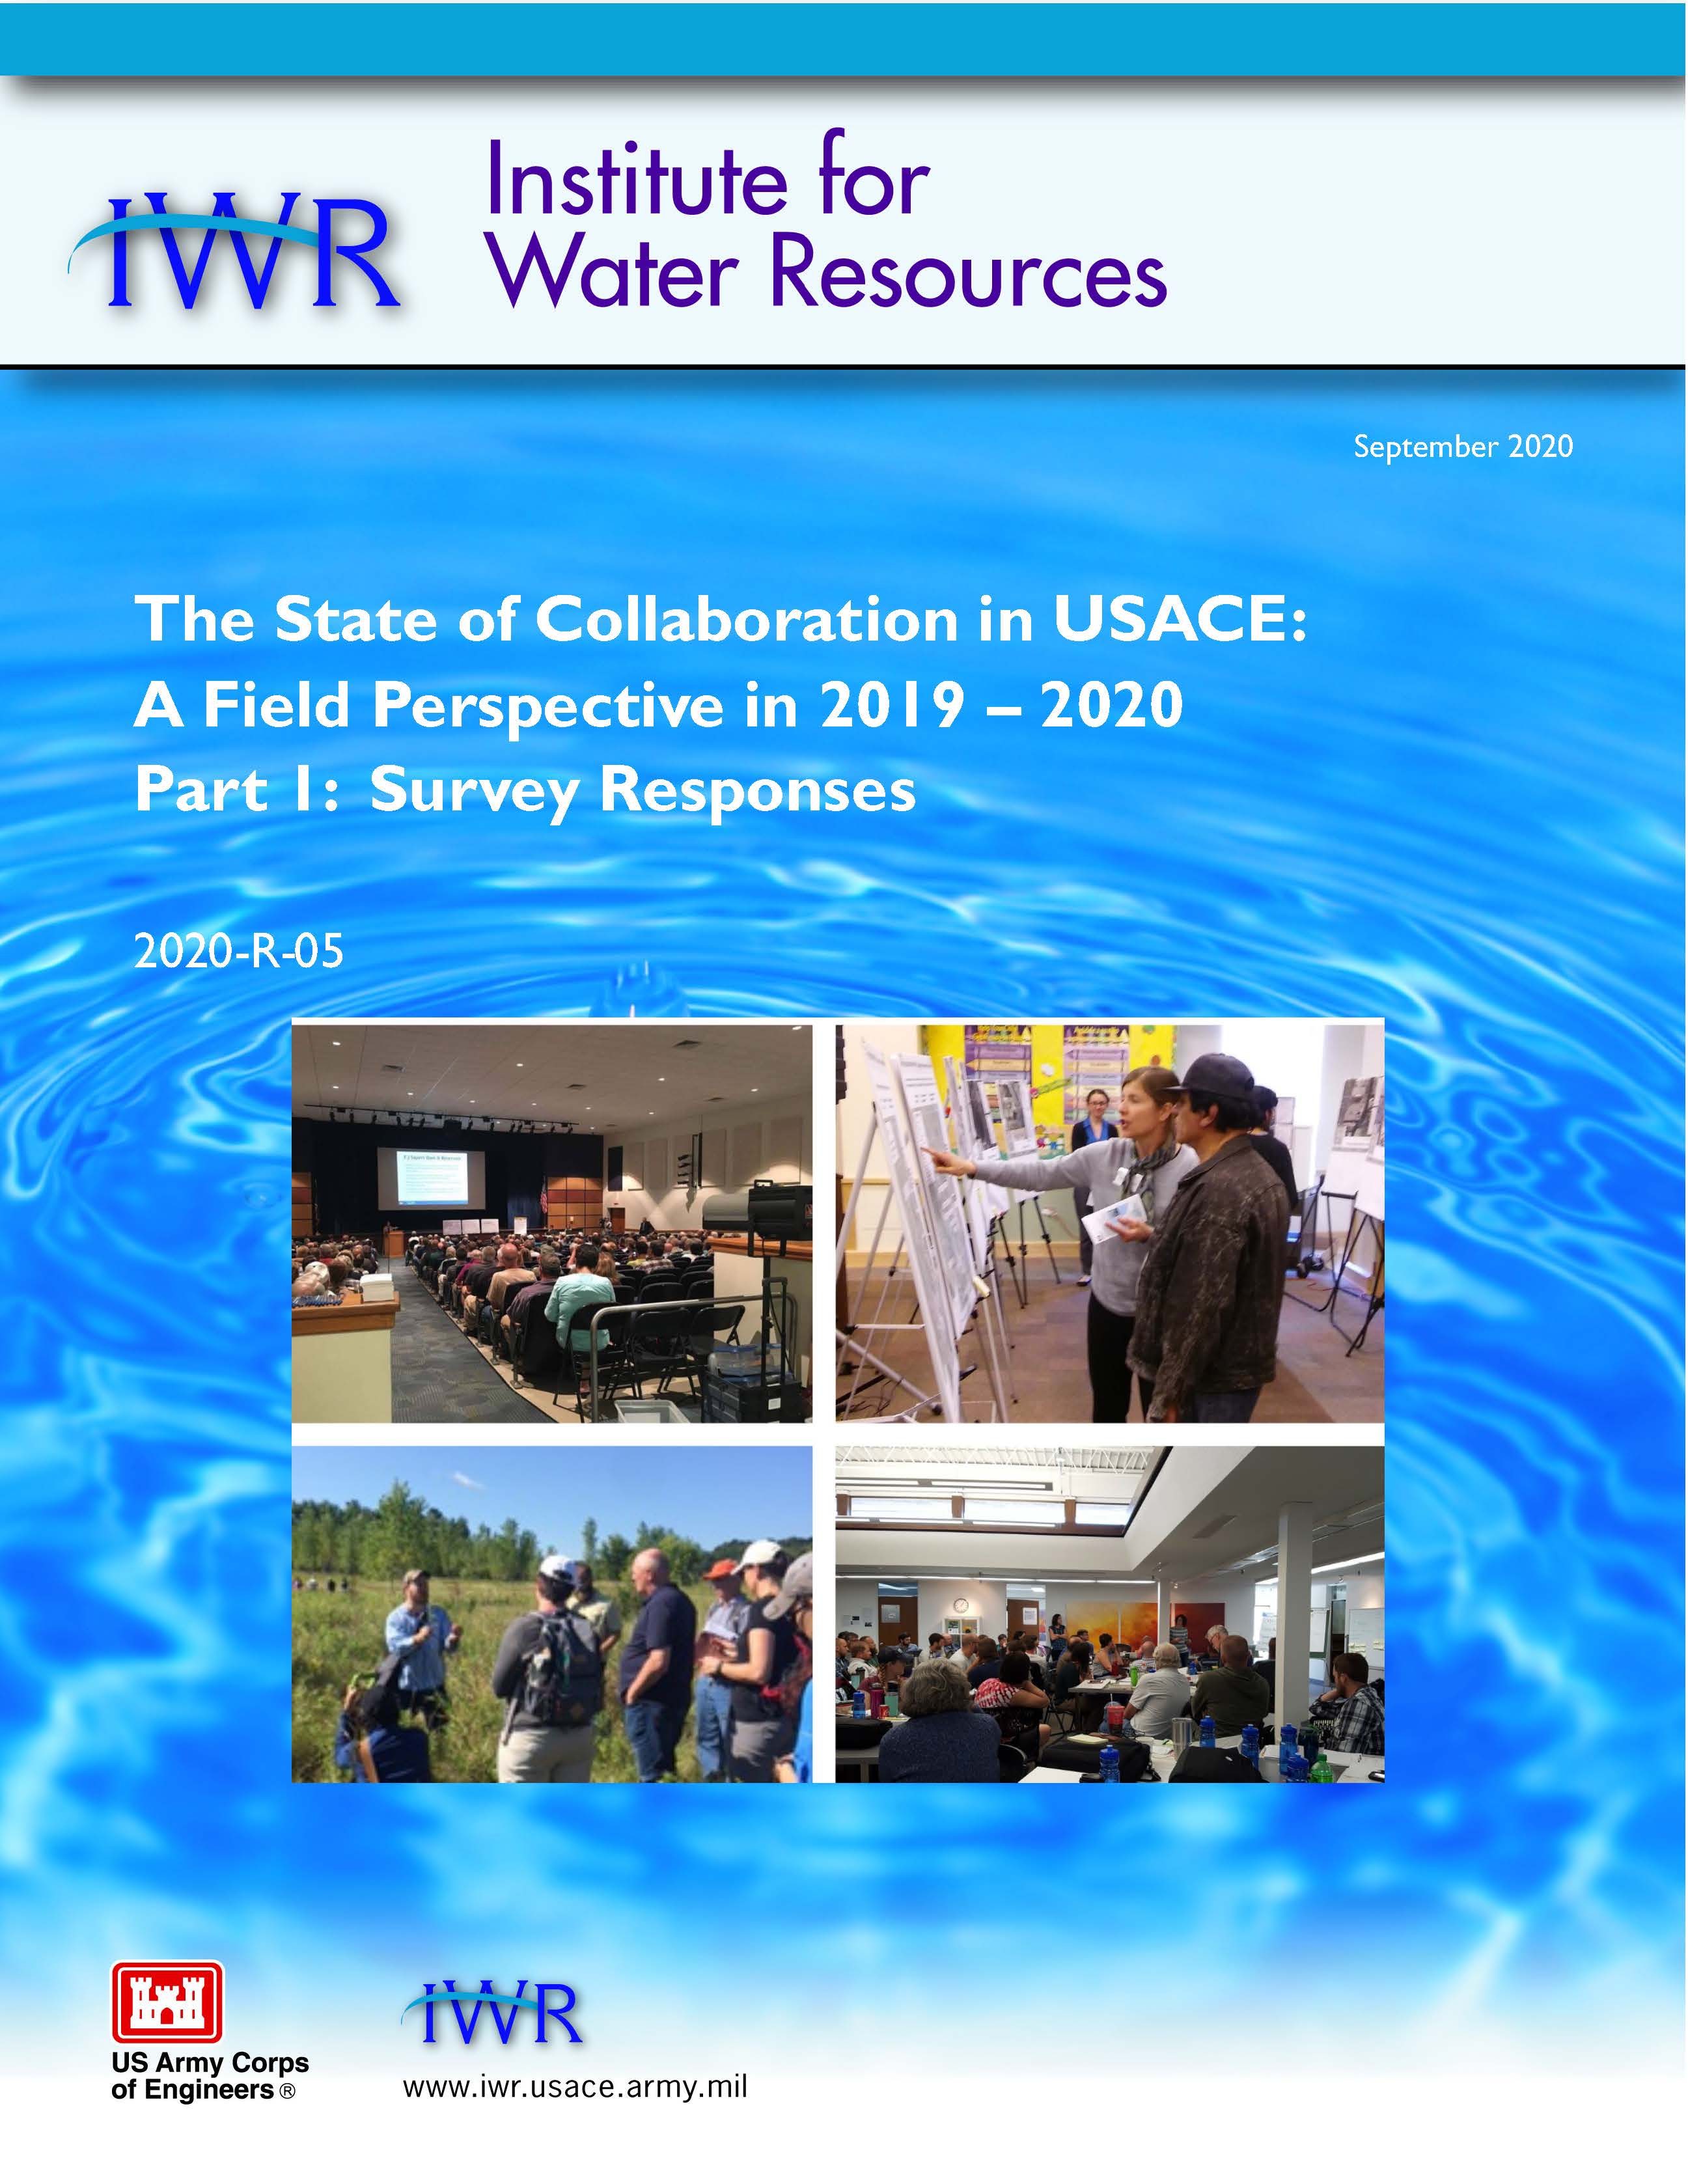 Cover of the State of Collaboration in USACE: A Field Perspective in 2019-2020